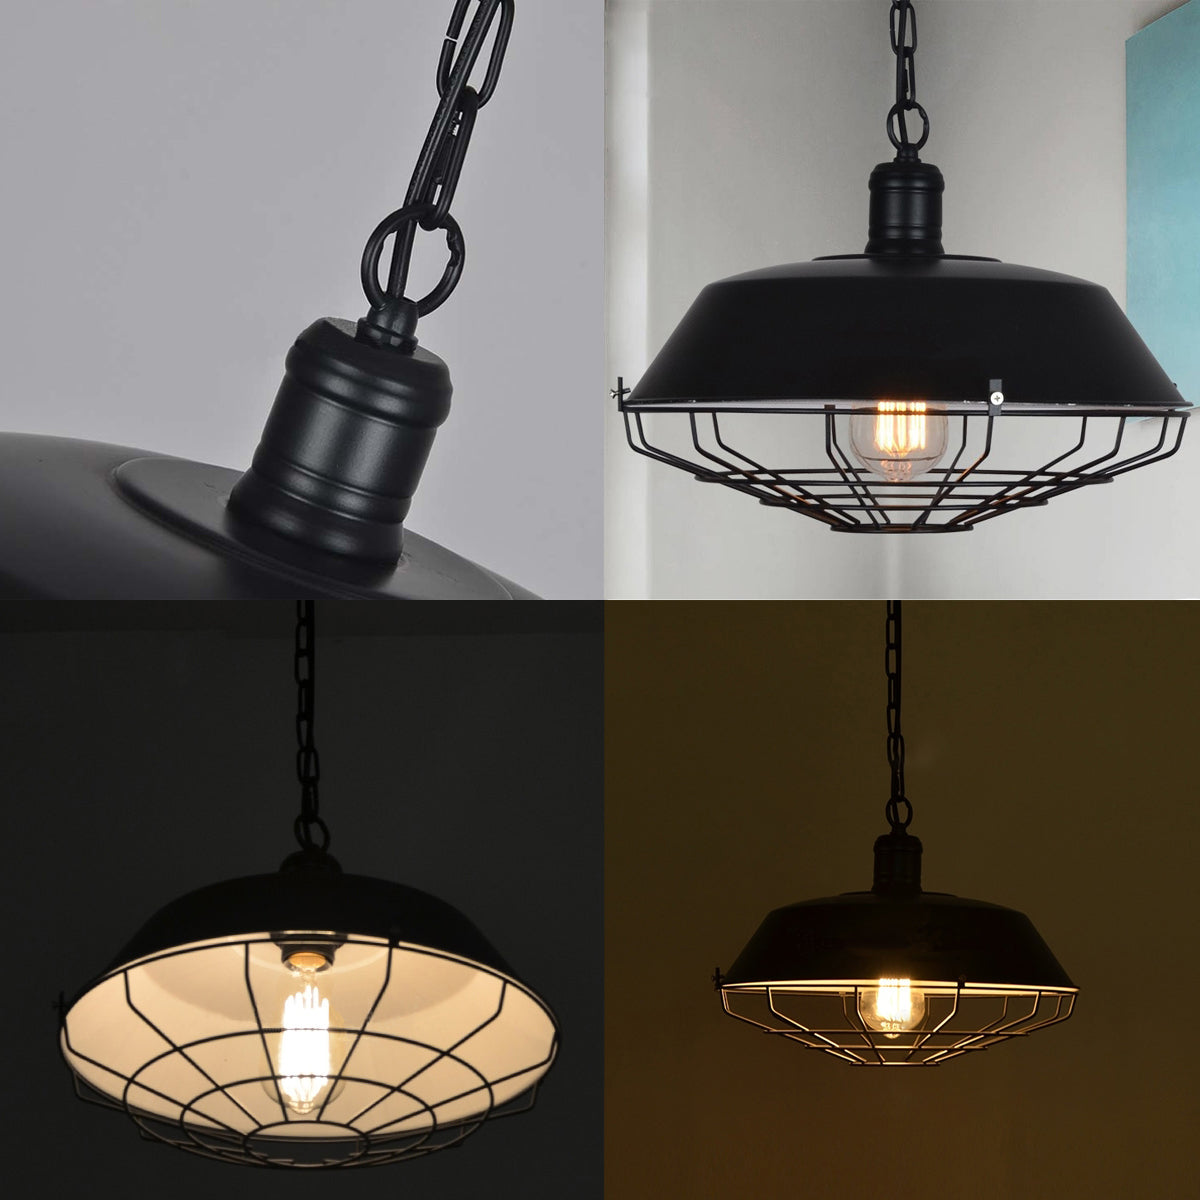 Our Margo pendant light is a stylish addition suitable for every room, its metal cage shape creates amazing shadow effects on the ceiling and walls. The lamp looks great with a filament light bulb, especially in industrial and eclectic interiors.